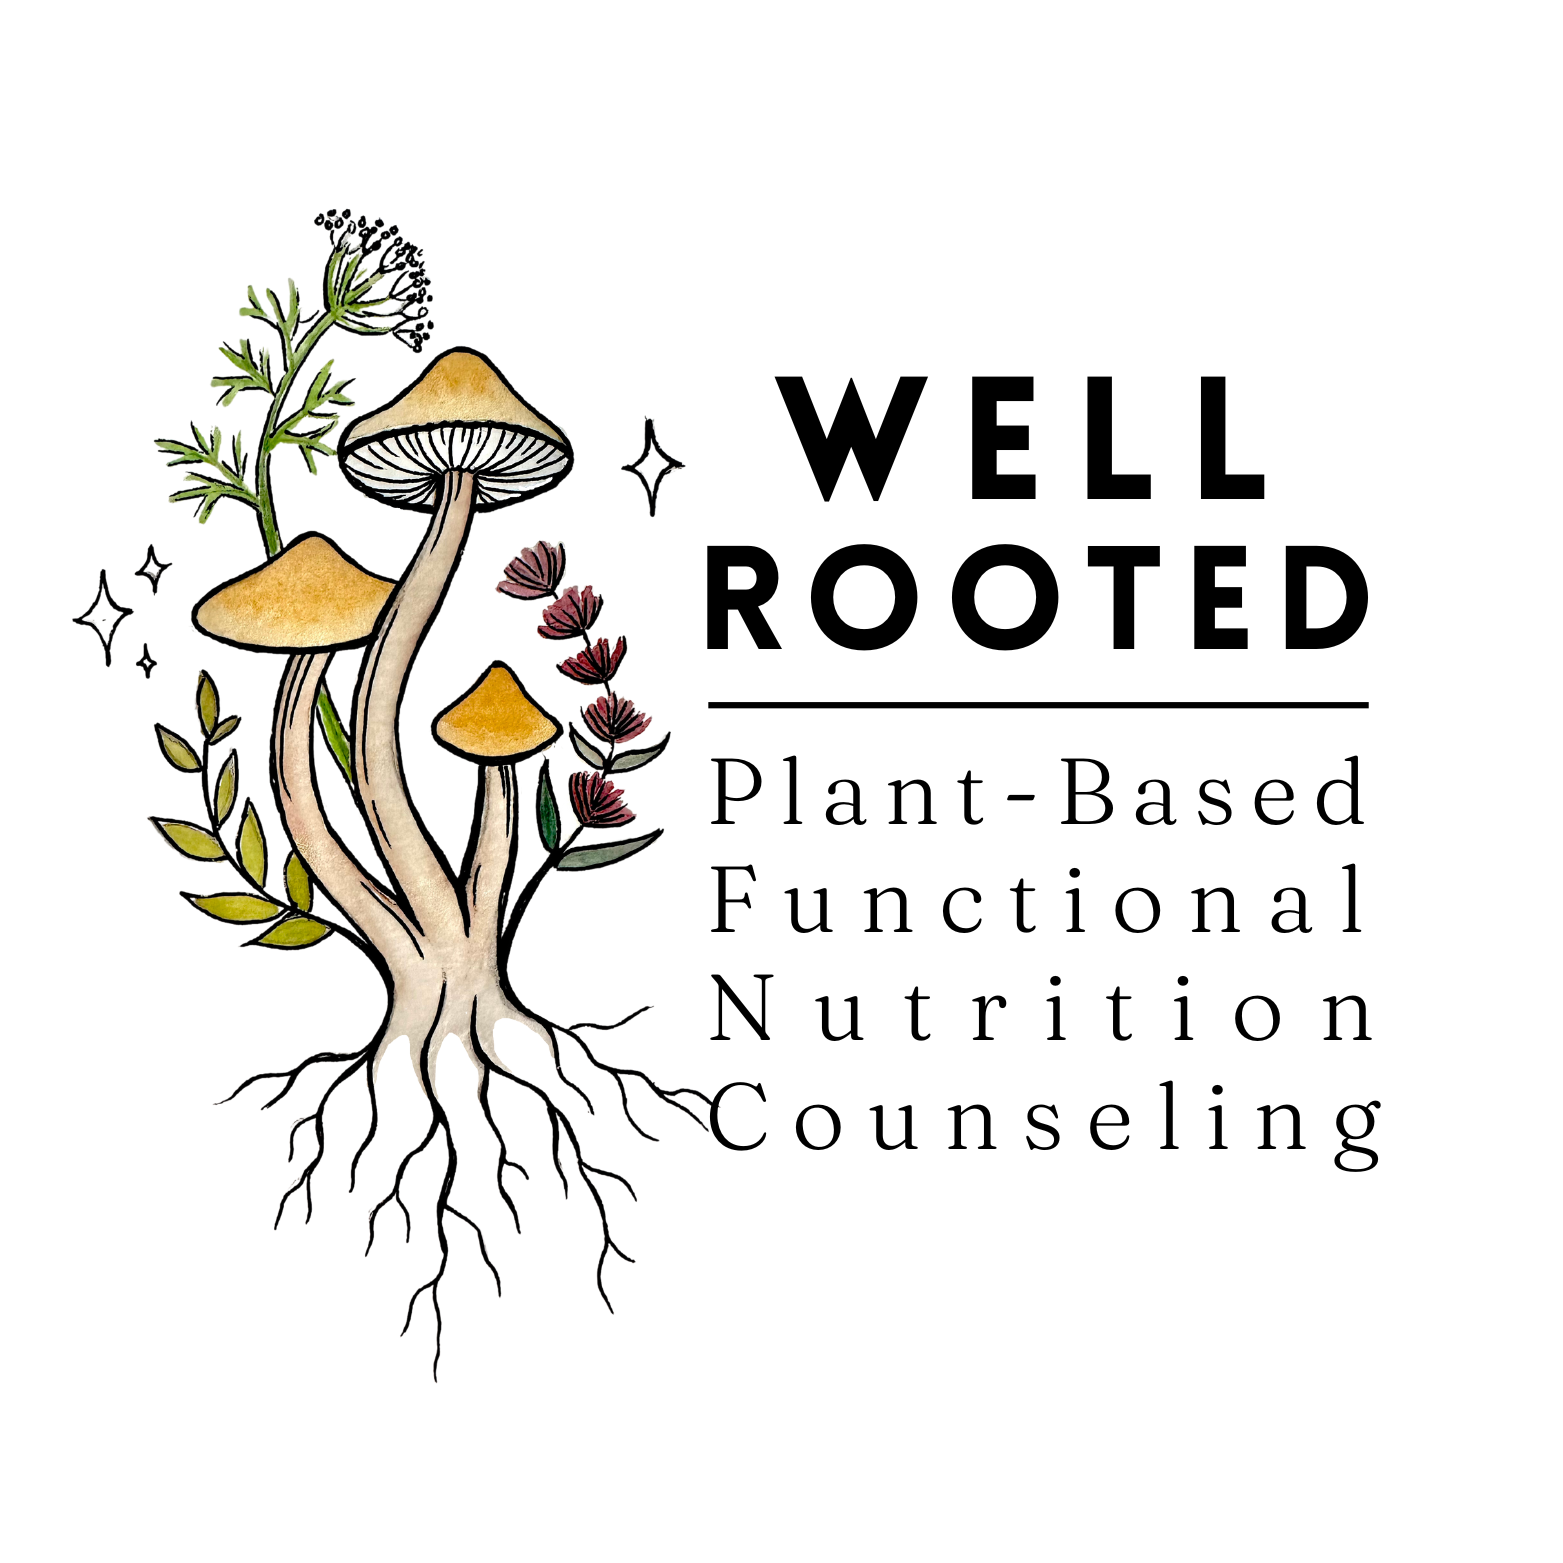 WELL ROOTED Plant-based Functional Nutrition Counseling (2).png